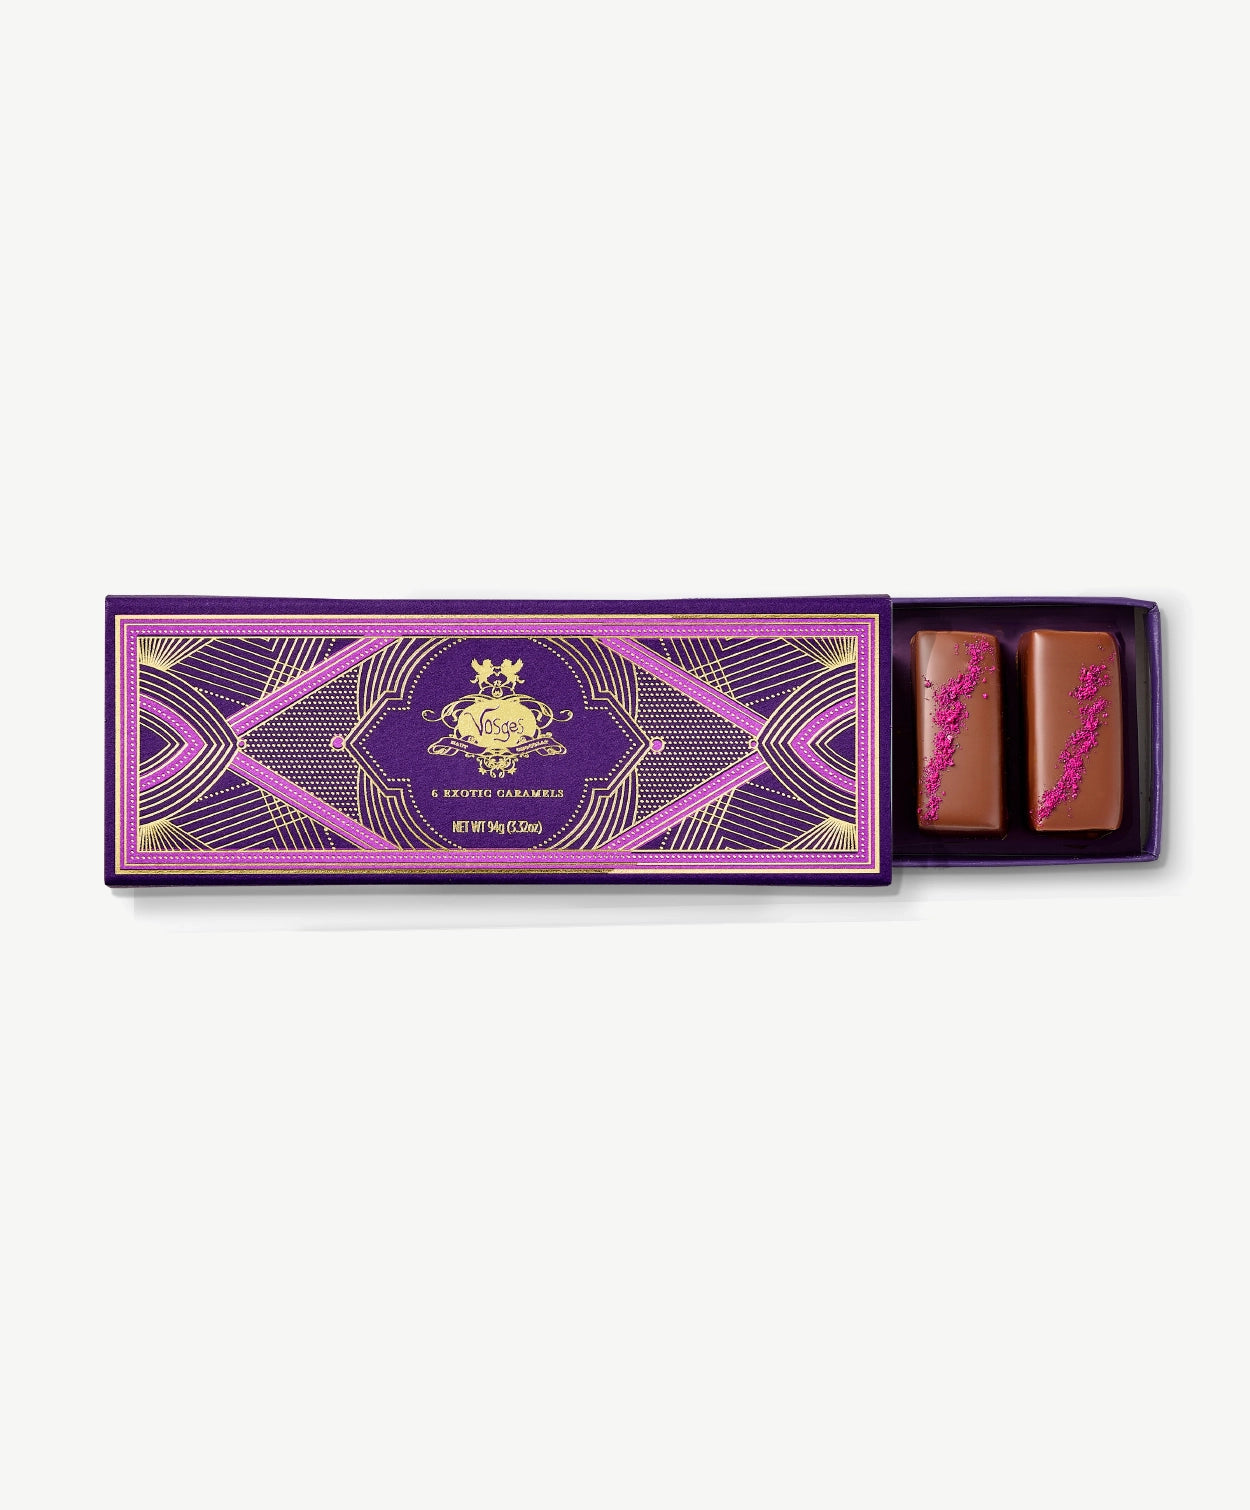 Purple Vosges Chocolate box opened revealing two chocolate covered caramels topped with red Hawaiian sea salt on a grey background.